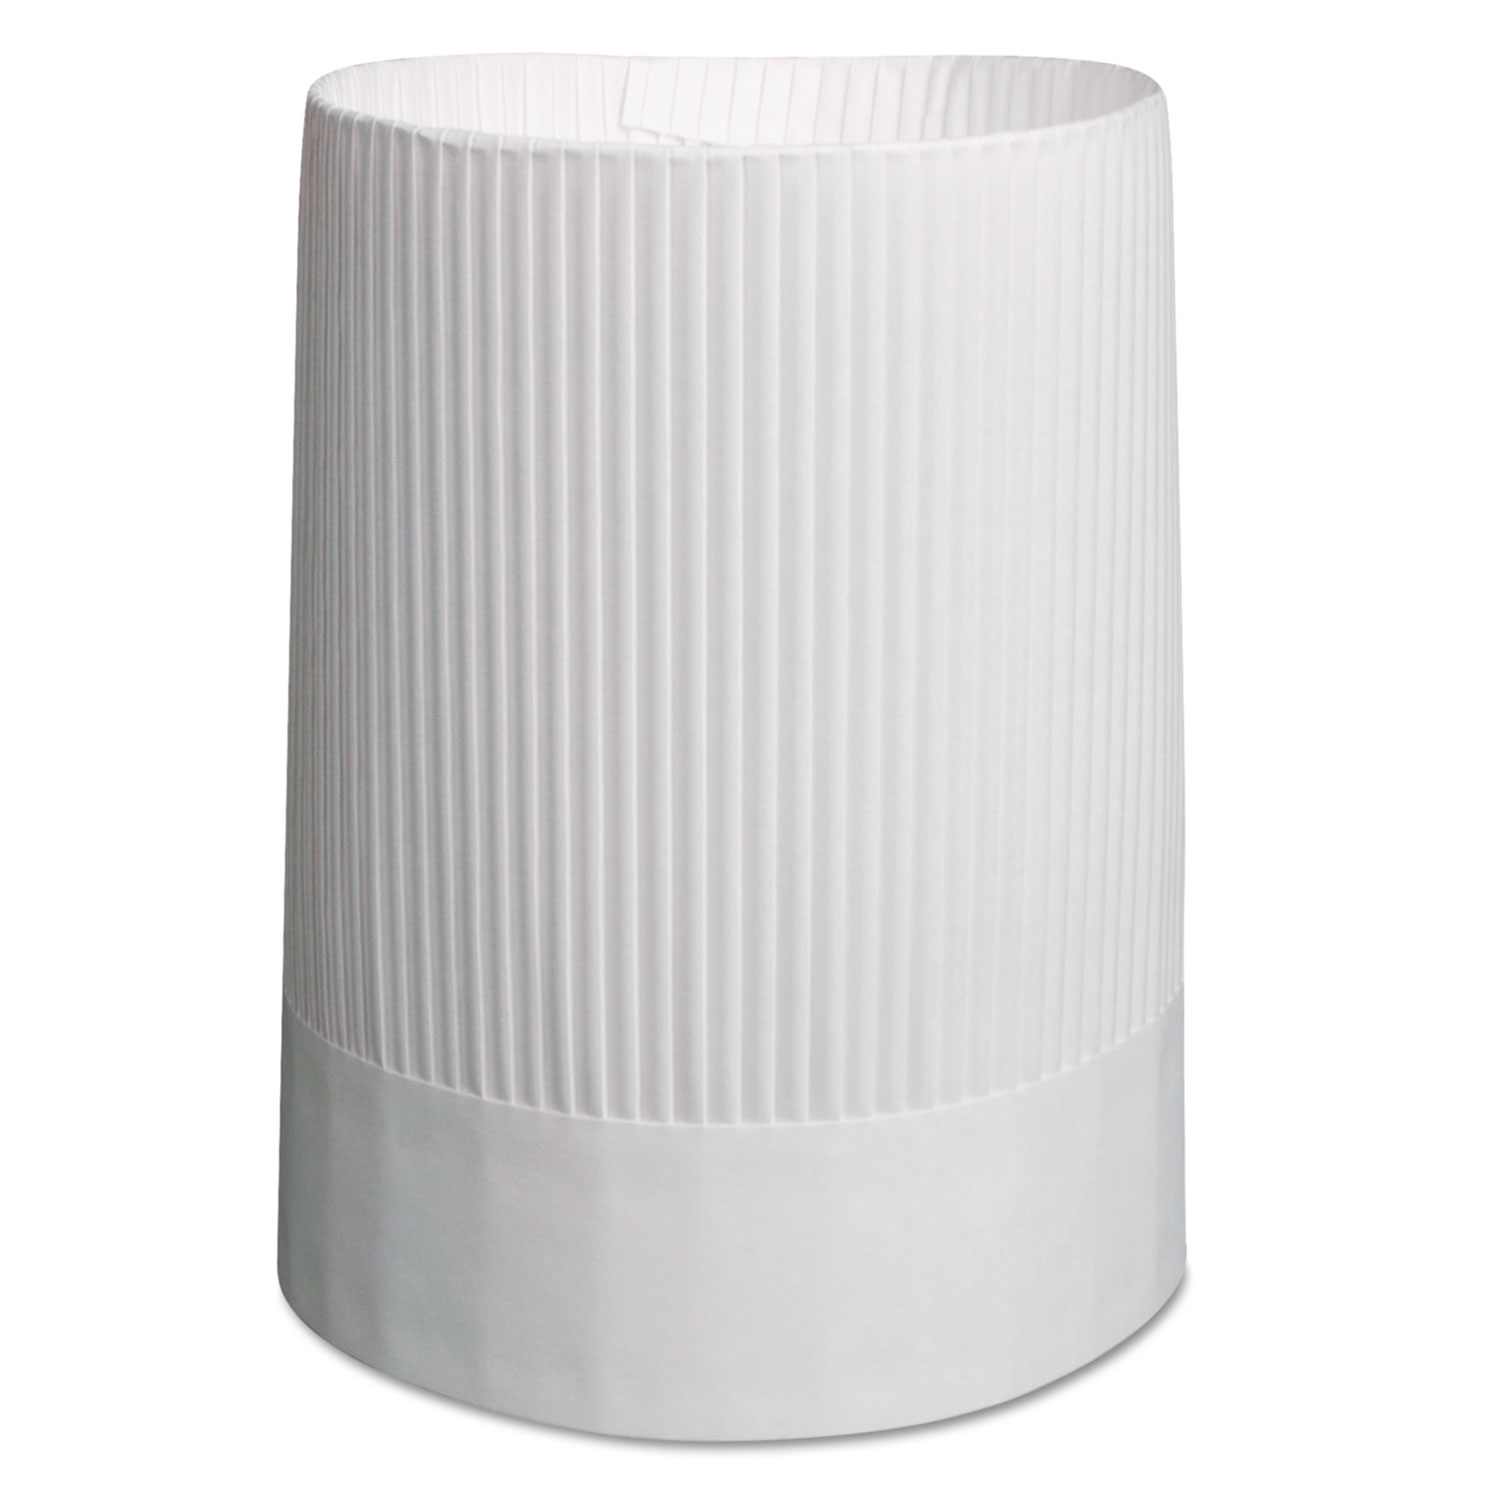 Stirling Fluted Chefs Hats, Paper, White, Adjustable, 10 in Tall, 12/Carton